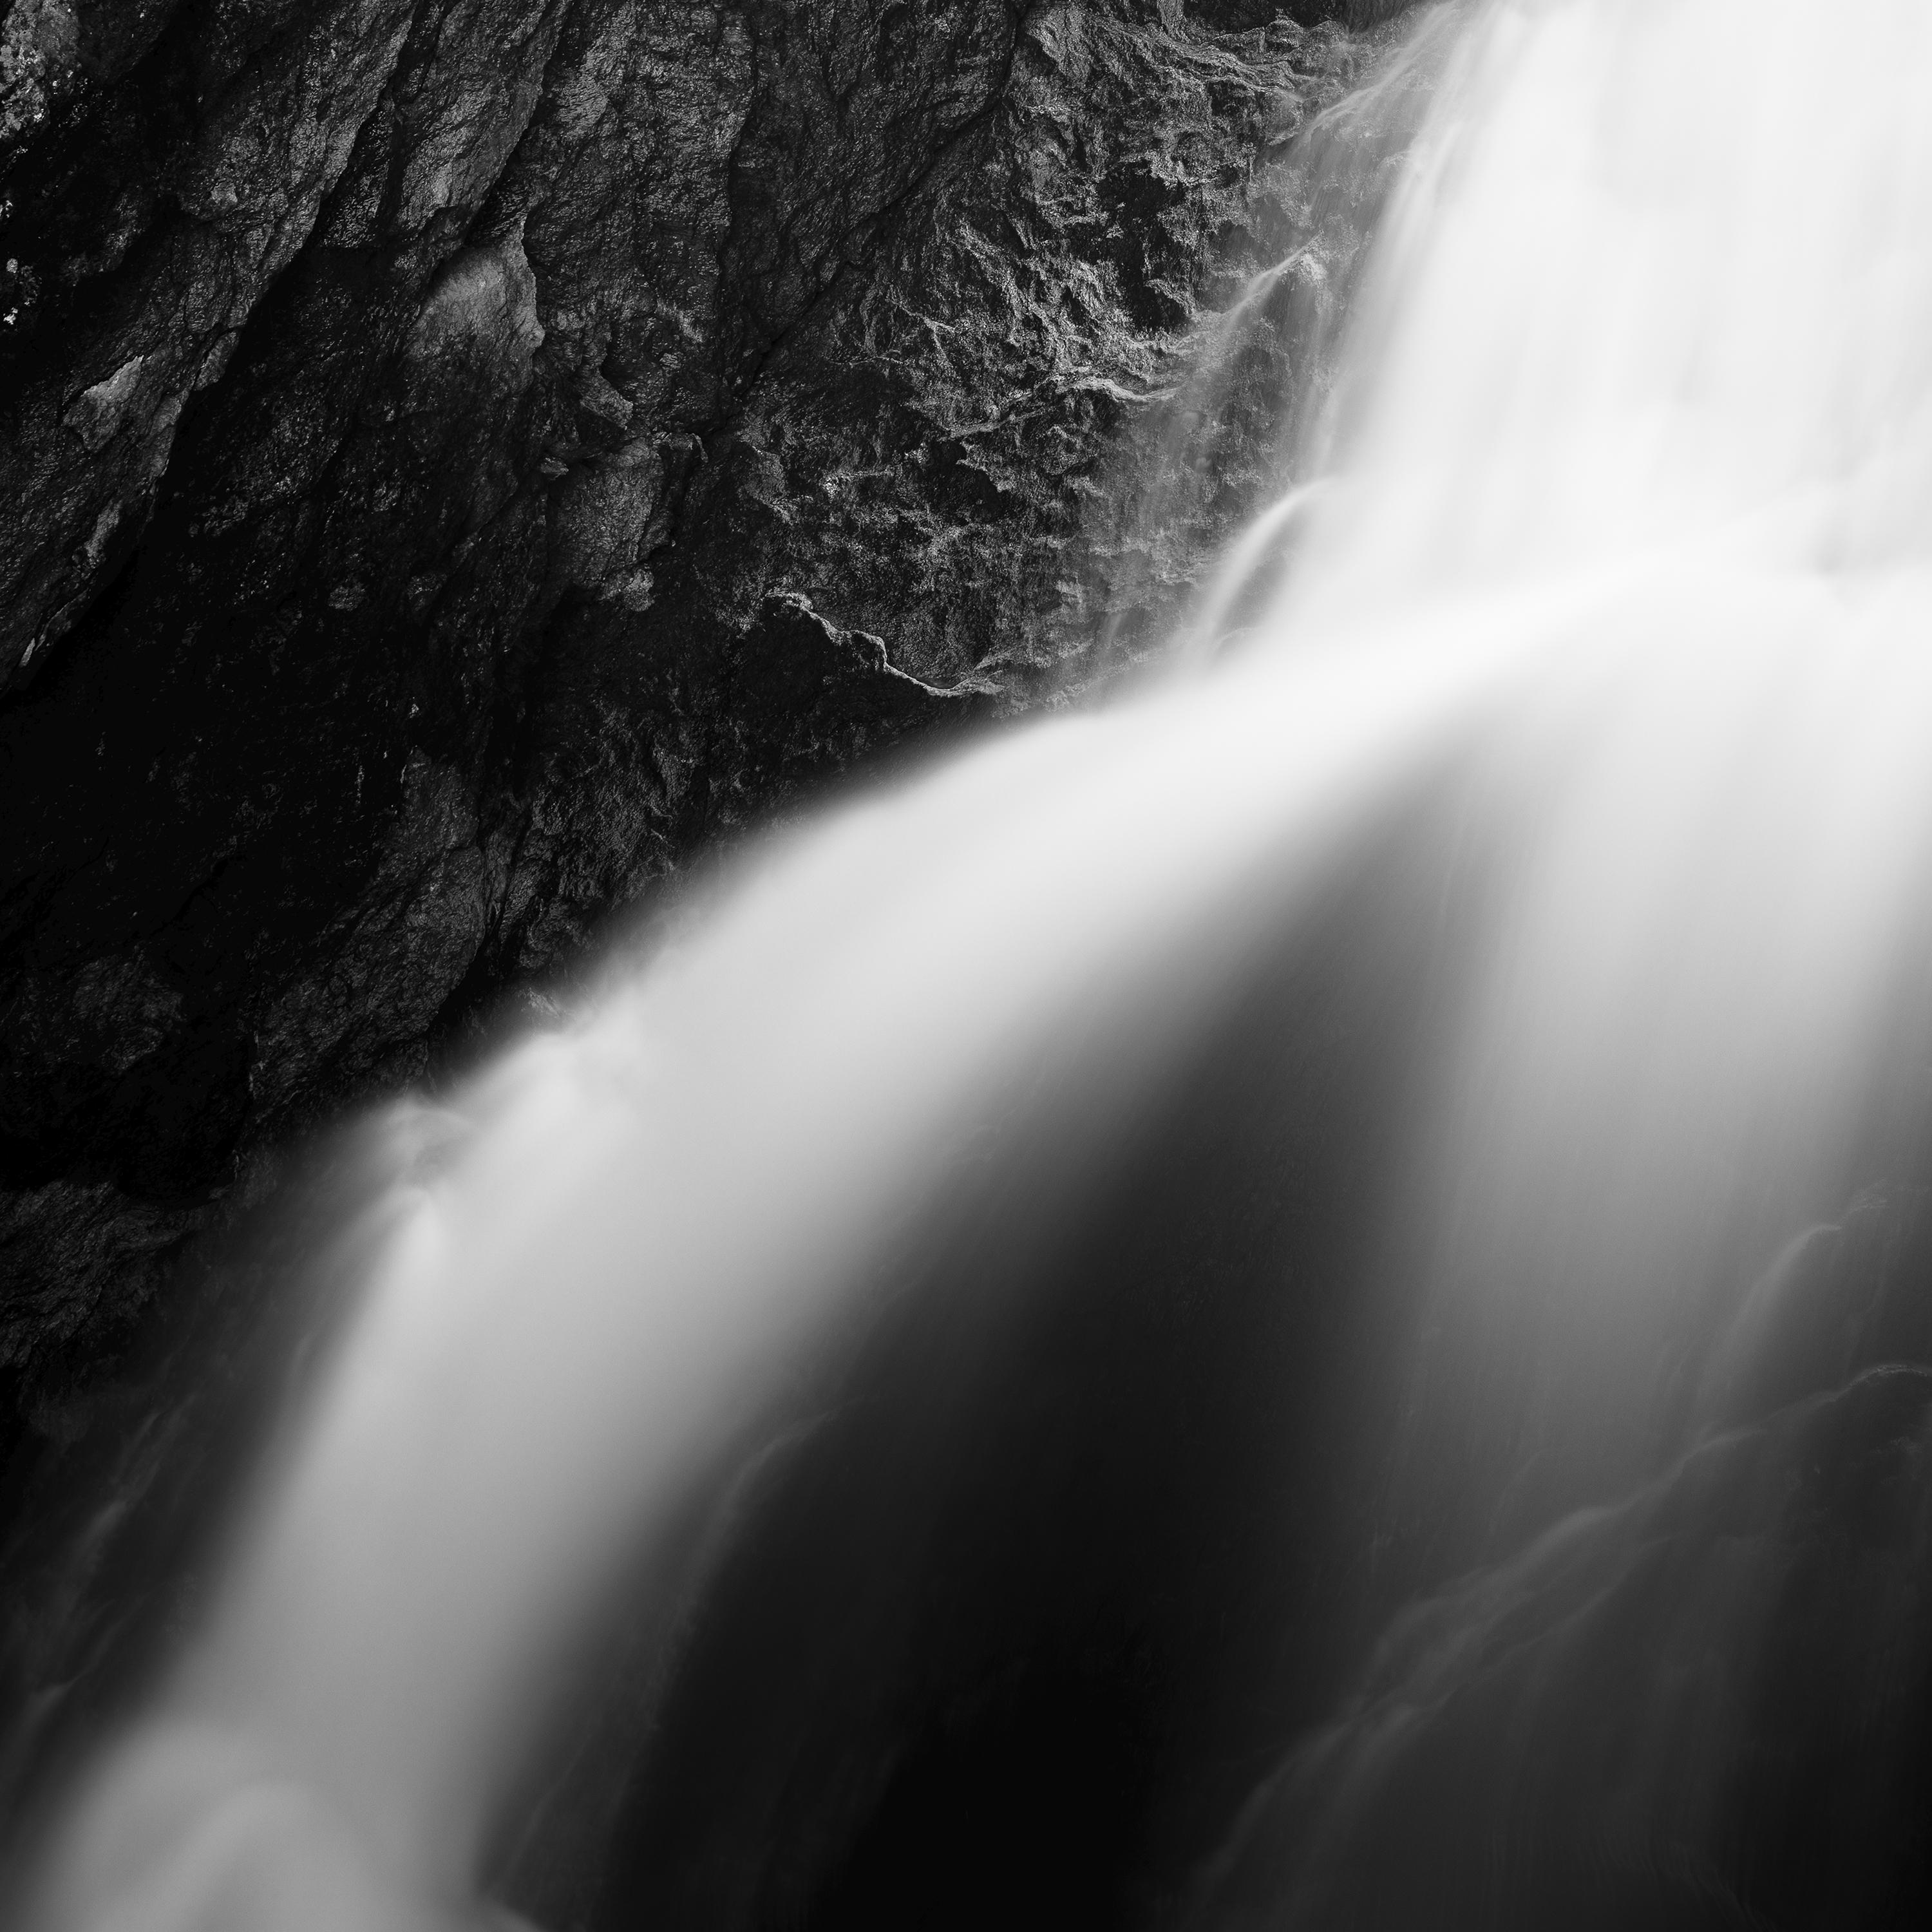 Krimmler Ache, waterfall, mountain river, black and white photography, landscape For Sale 4